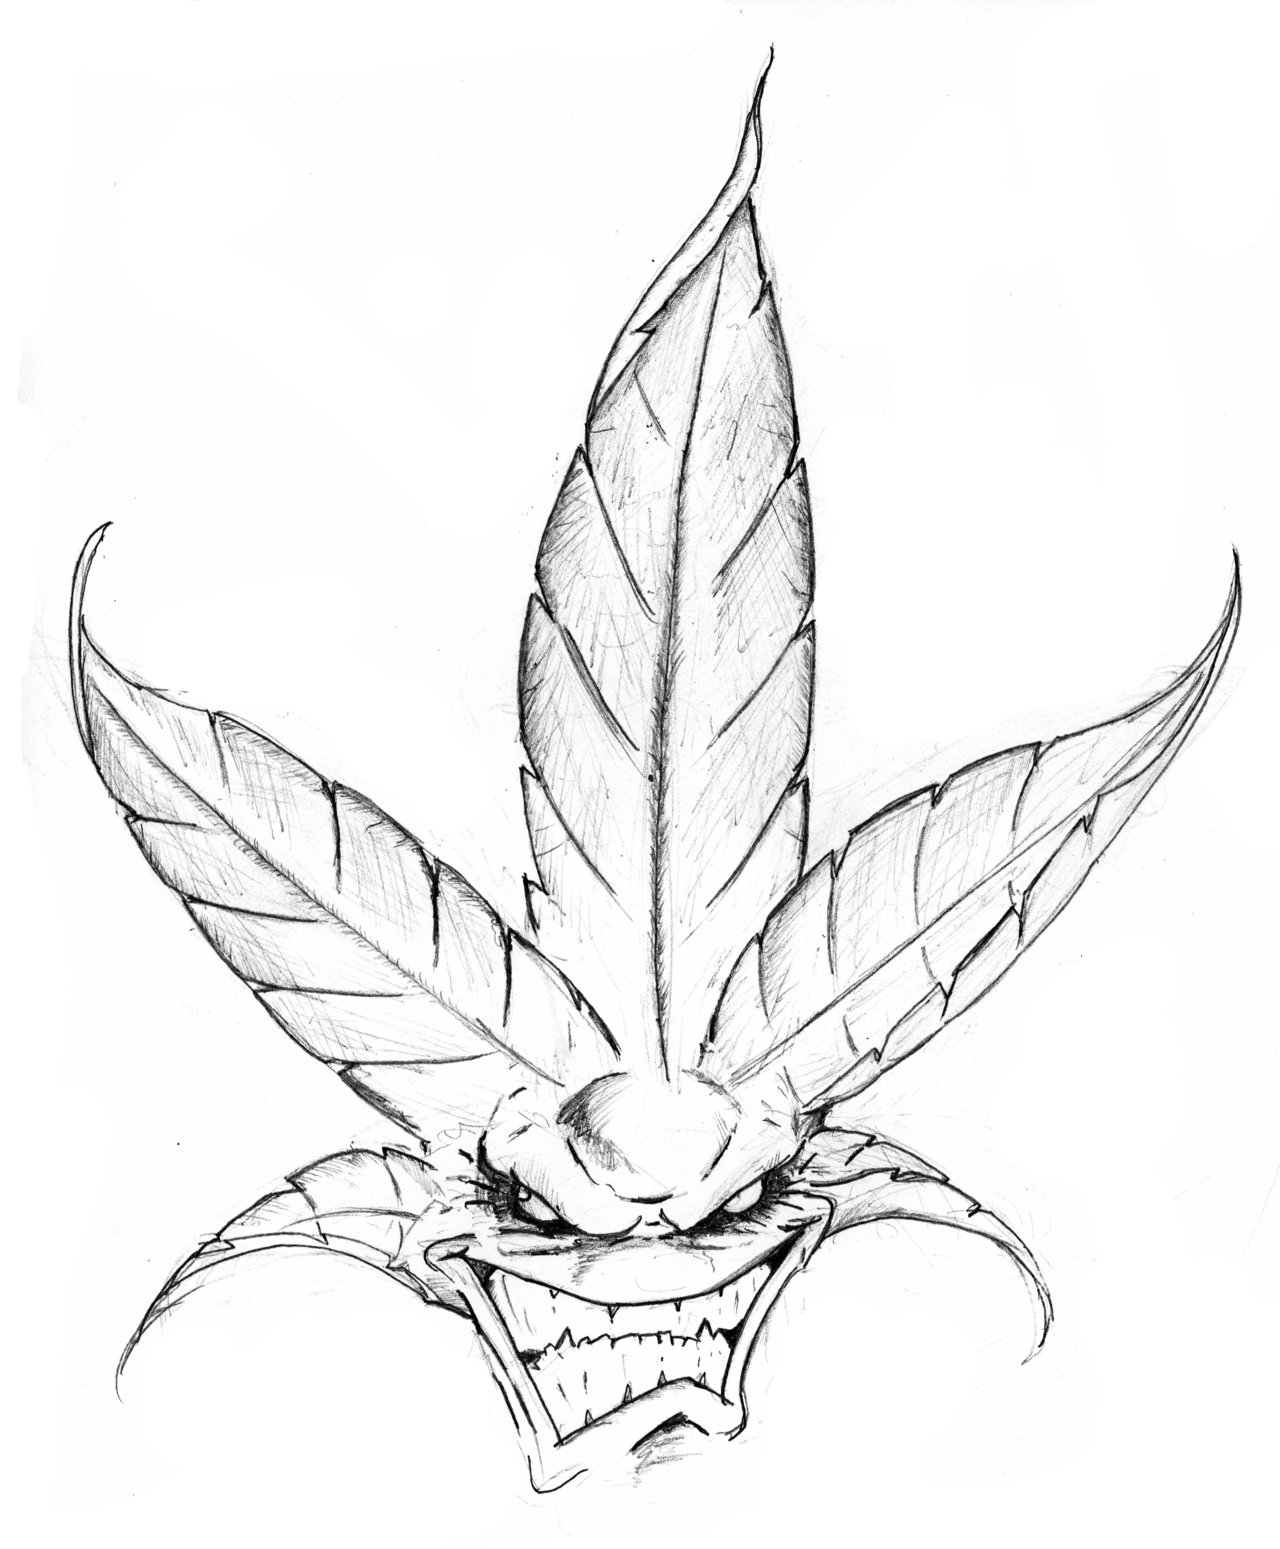 The Best Free Stoner Drawing Images Download From 79 Free Drawings Of Stoner At Getdrawings We are just here to spread love, peace, light and the healing nature's of cannabis�. getdrawings com